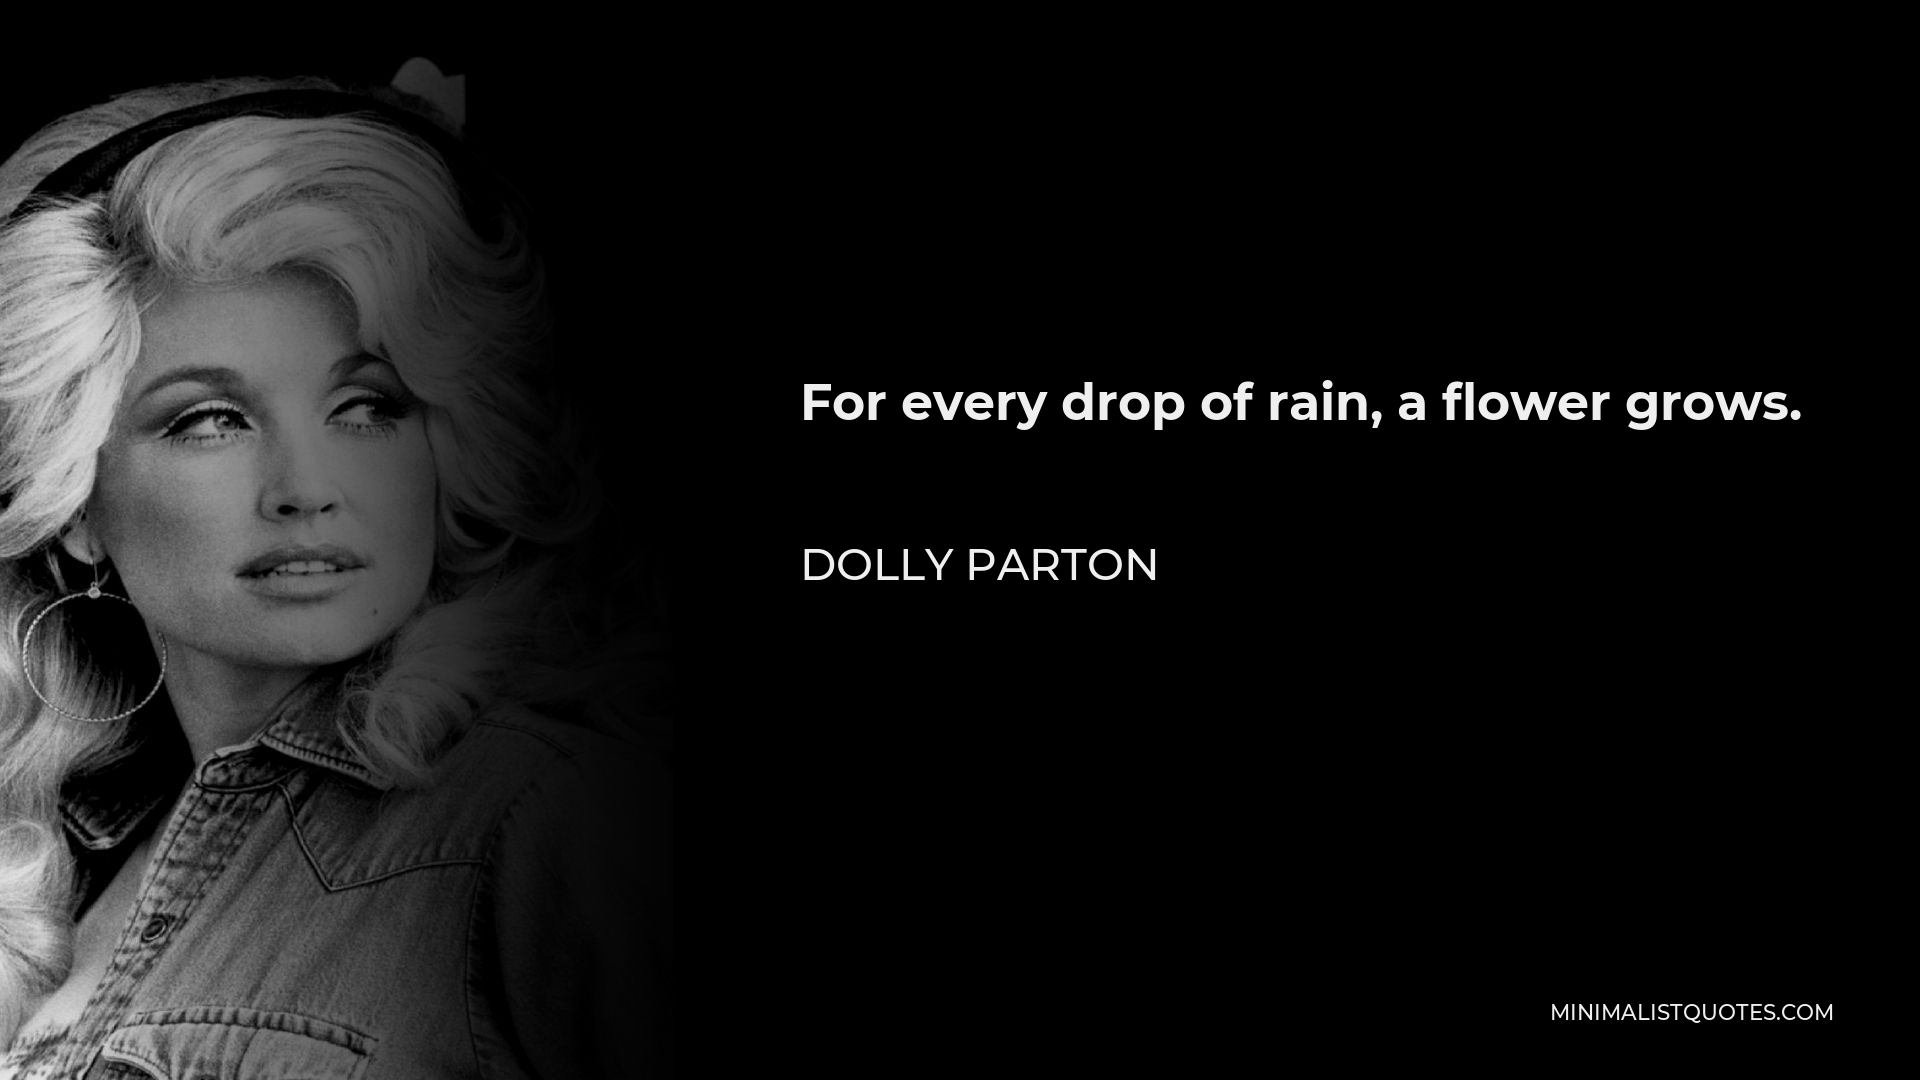 Dolly Parton Quote - For every drop of rain, a flower grows.